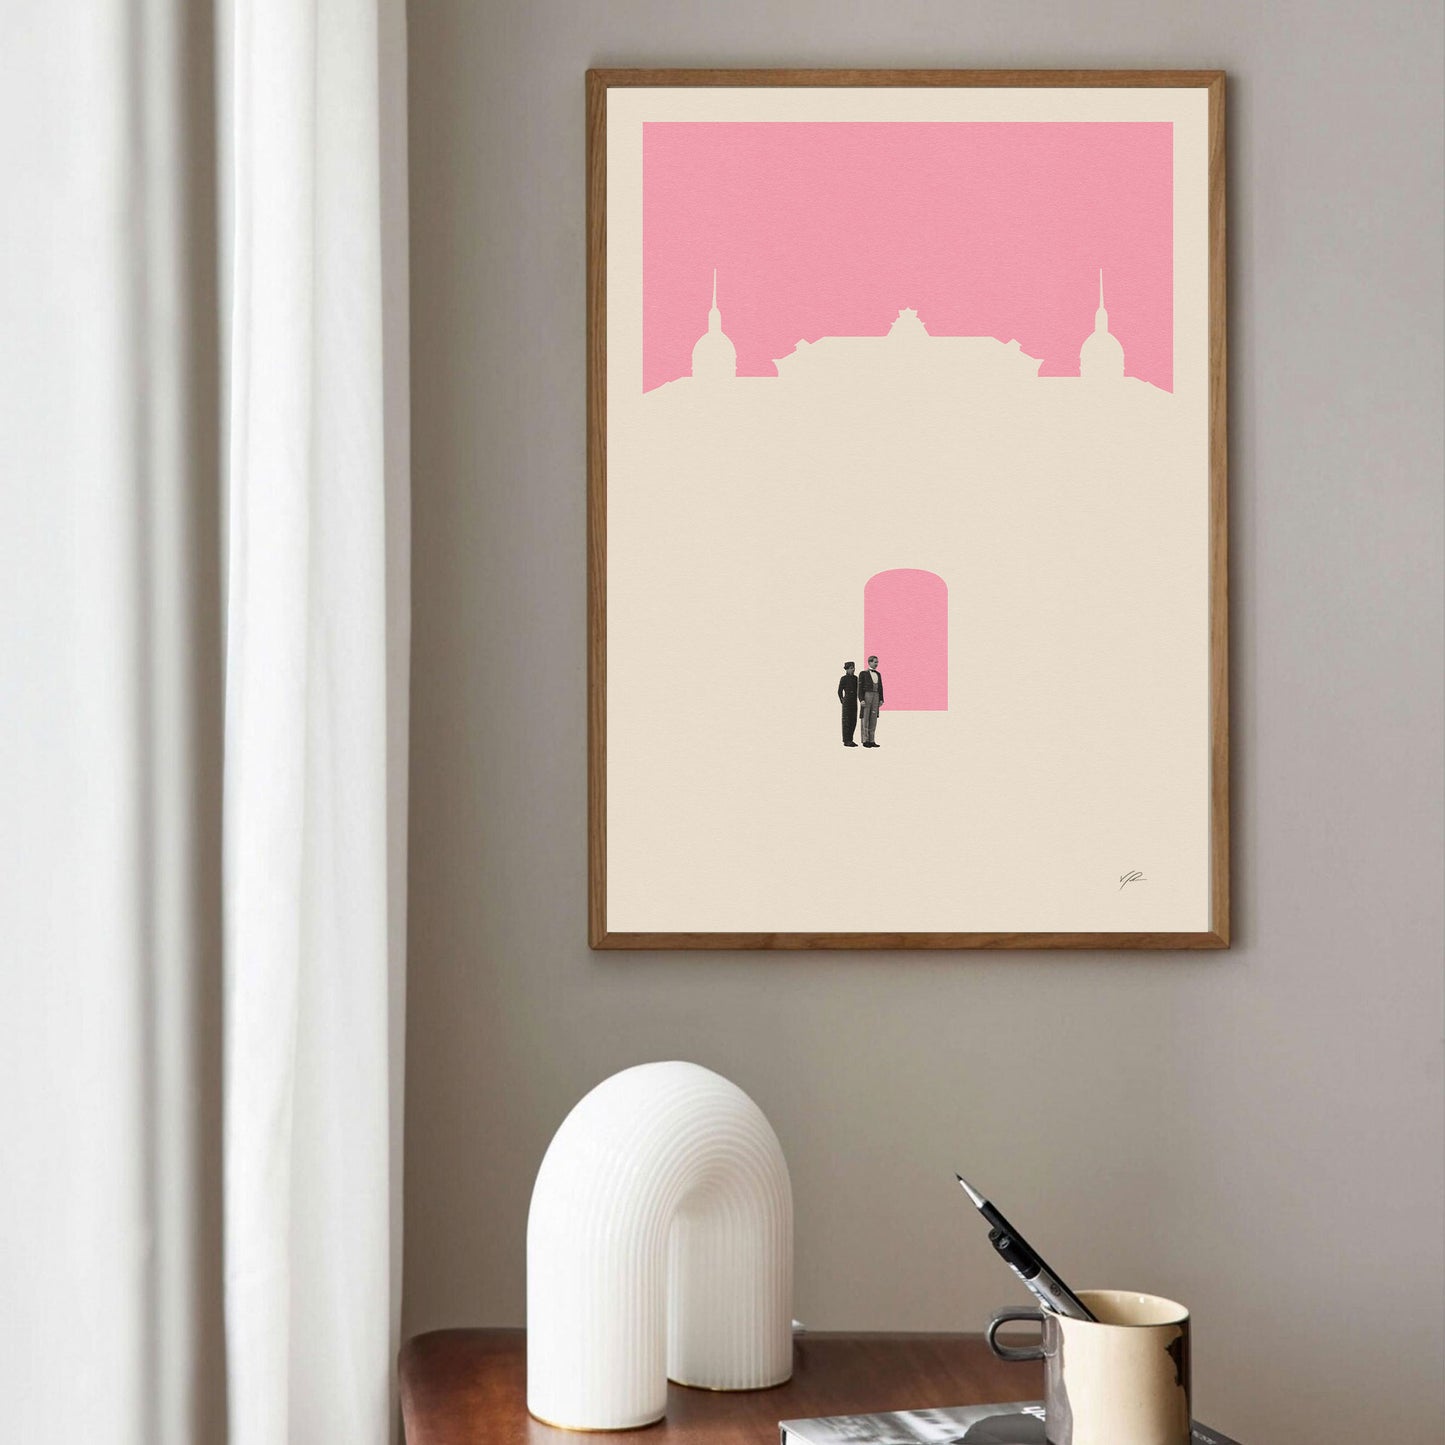 The Grand Budapest Hotel Inspired Poster | Minimalist Art Print | Retro Art Print | Wall Art | Housewarming Gift | Wes Anderson Movie Poster